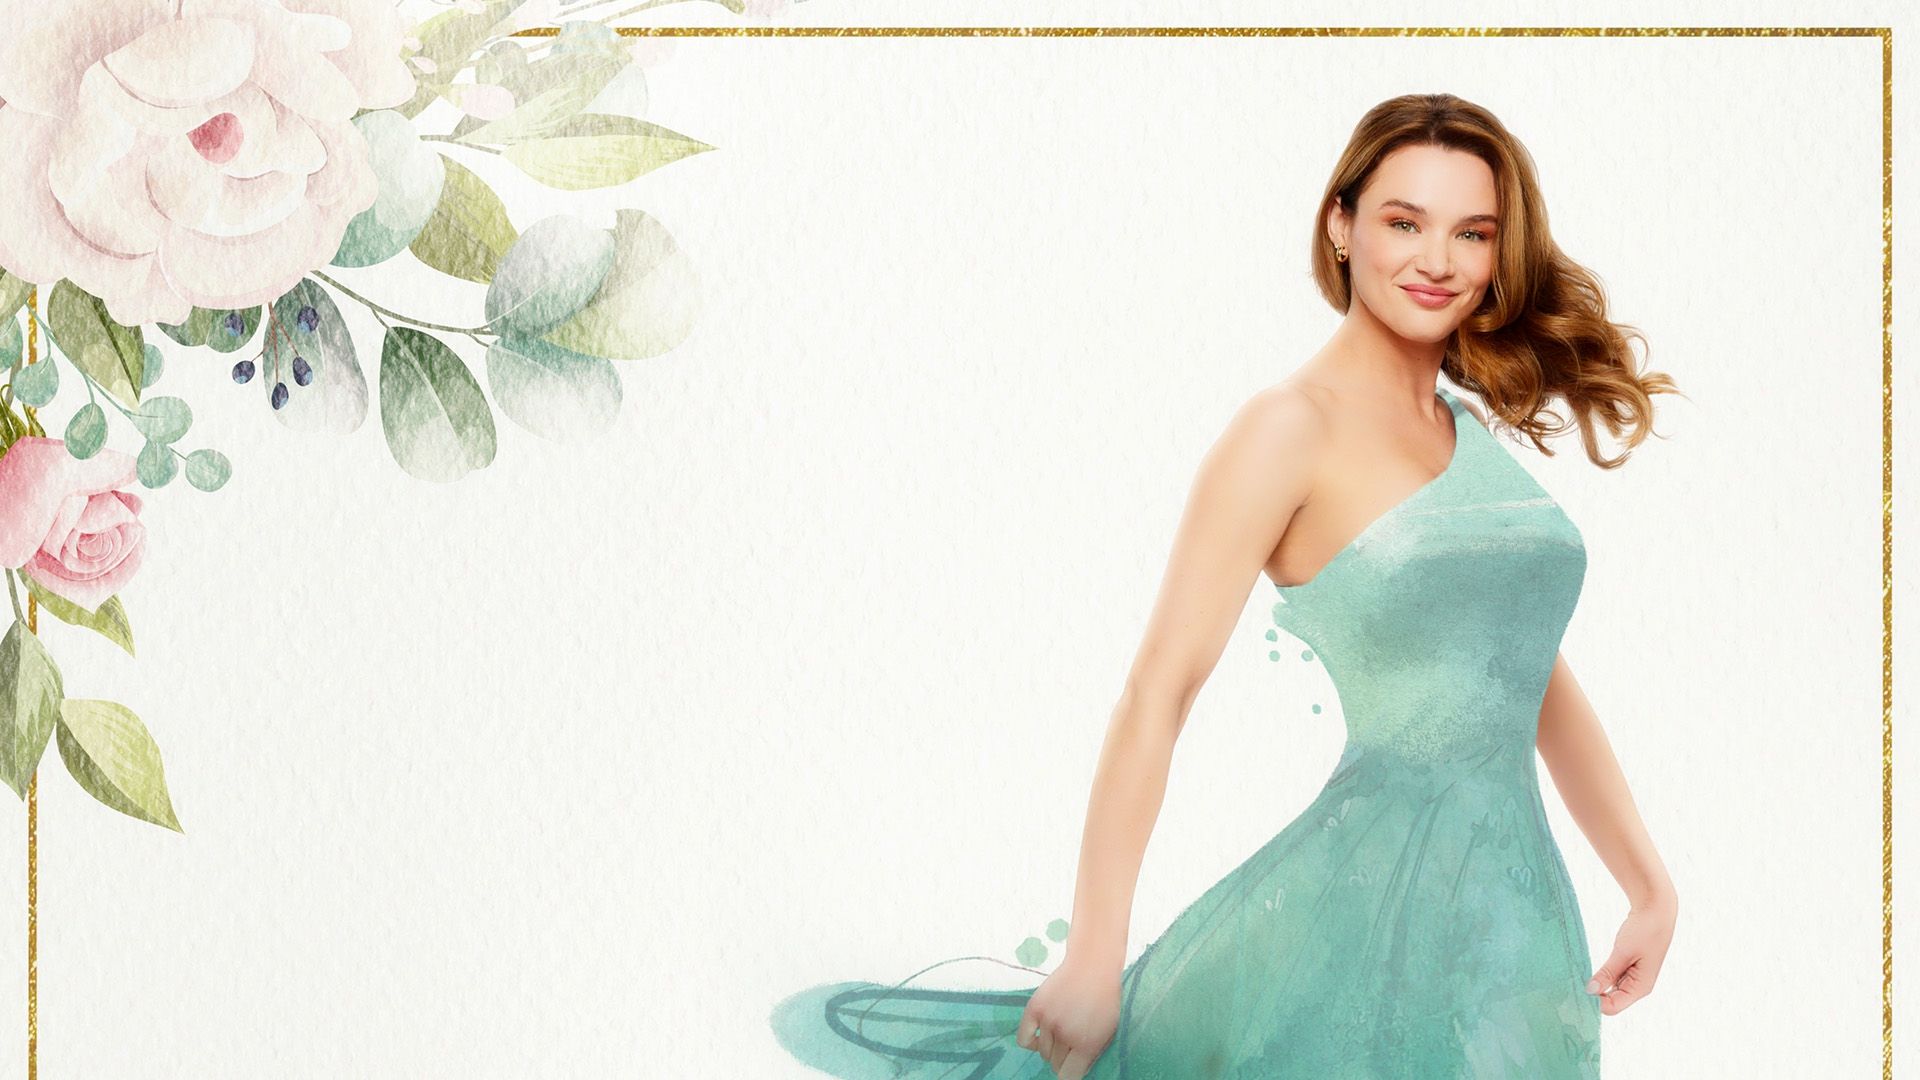 The Professional Bridesmaid background